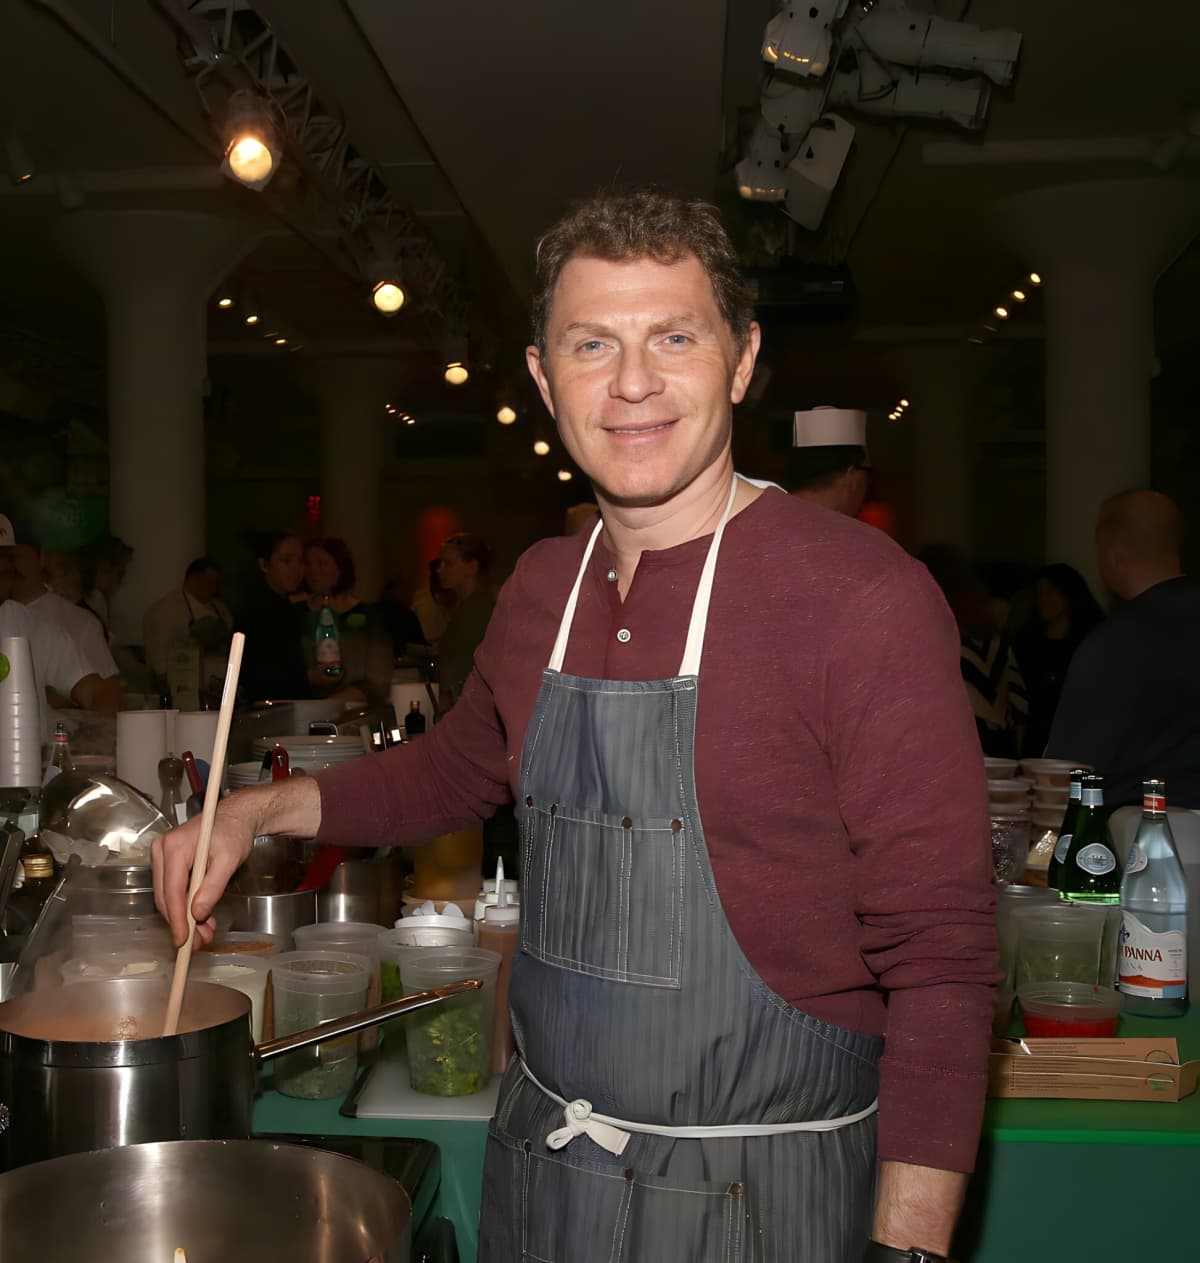 Chef Bobby Flay cooking in a restaurant kitchen